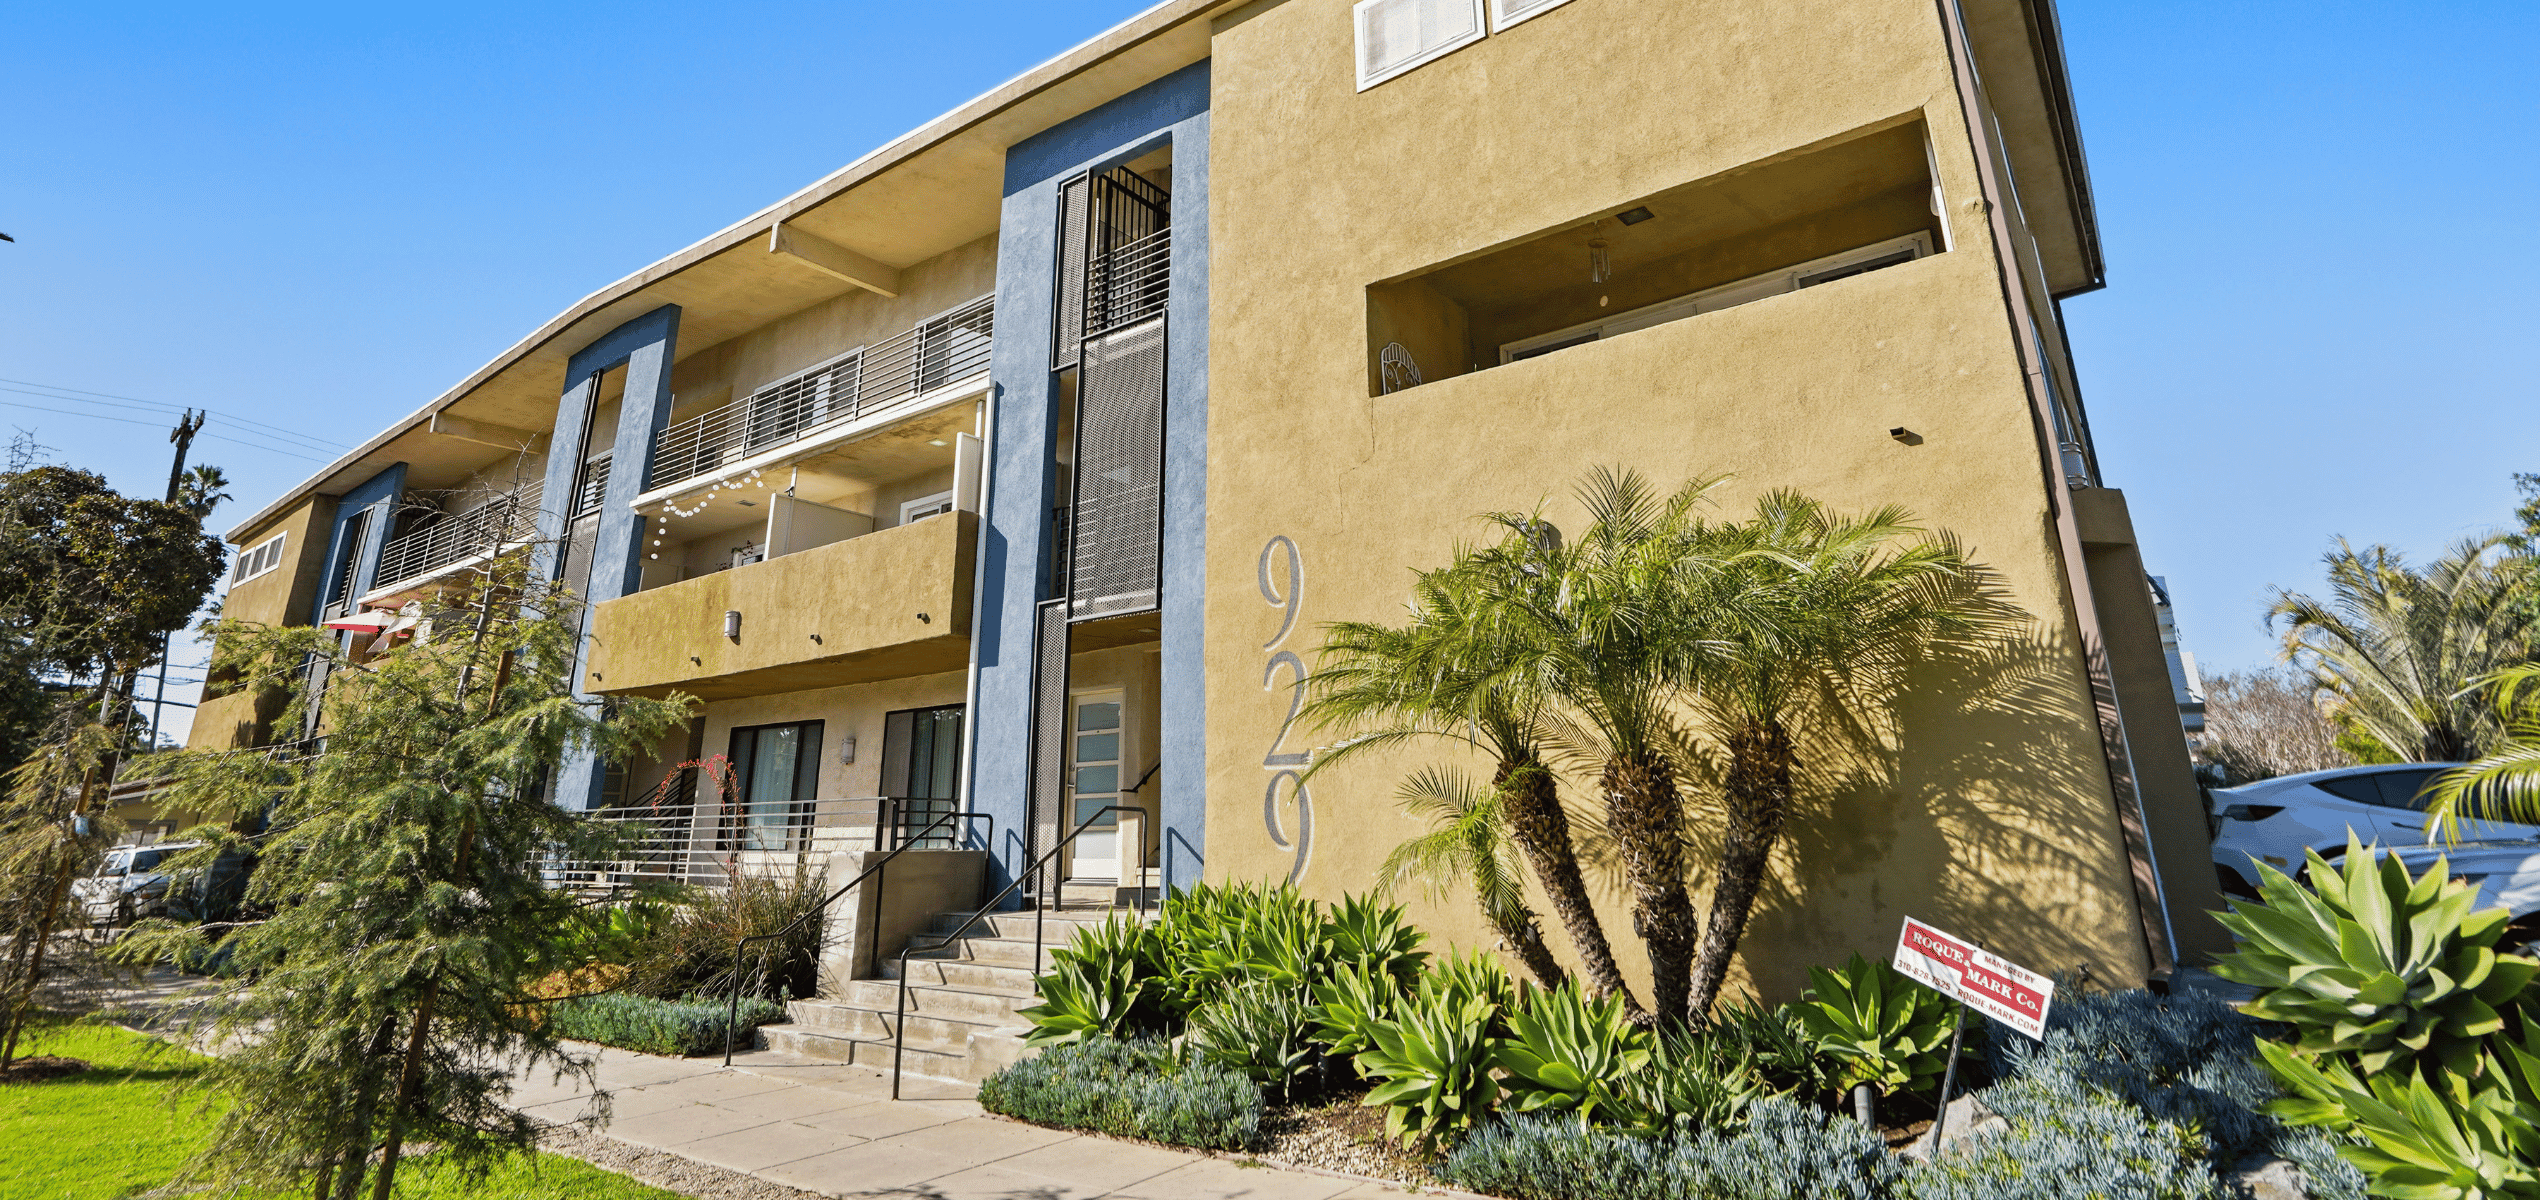 Front of 929 Idaho, a multifamily property in Santa Monica